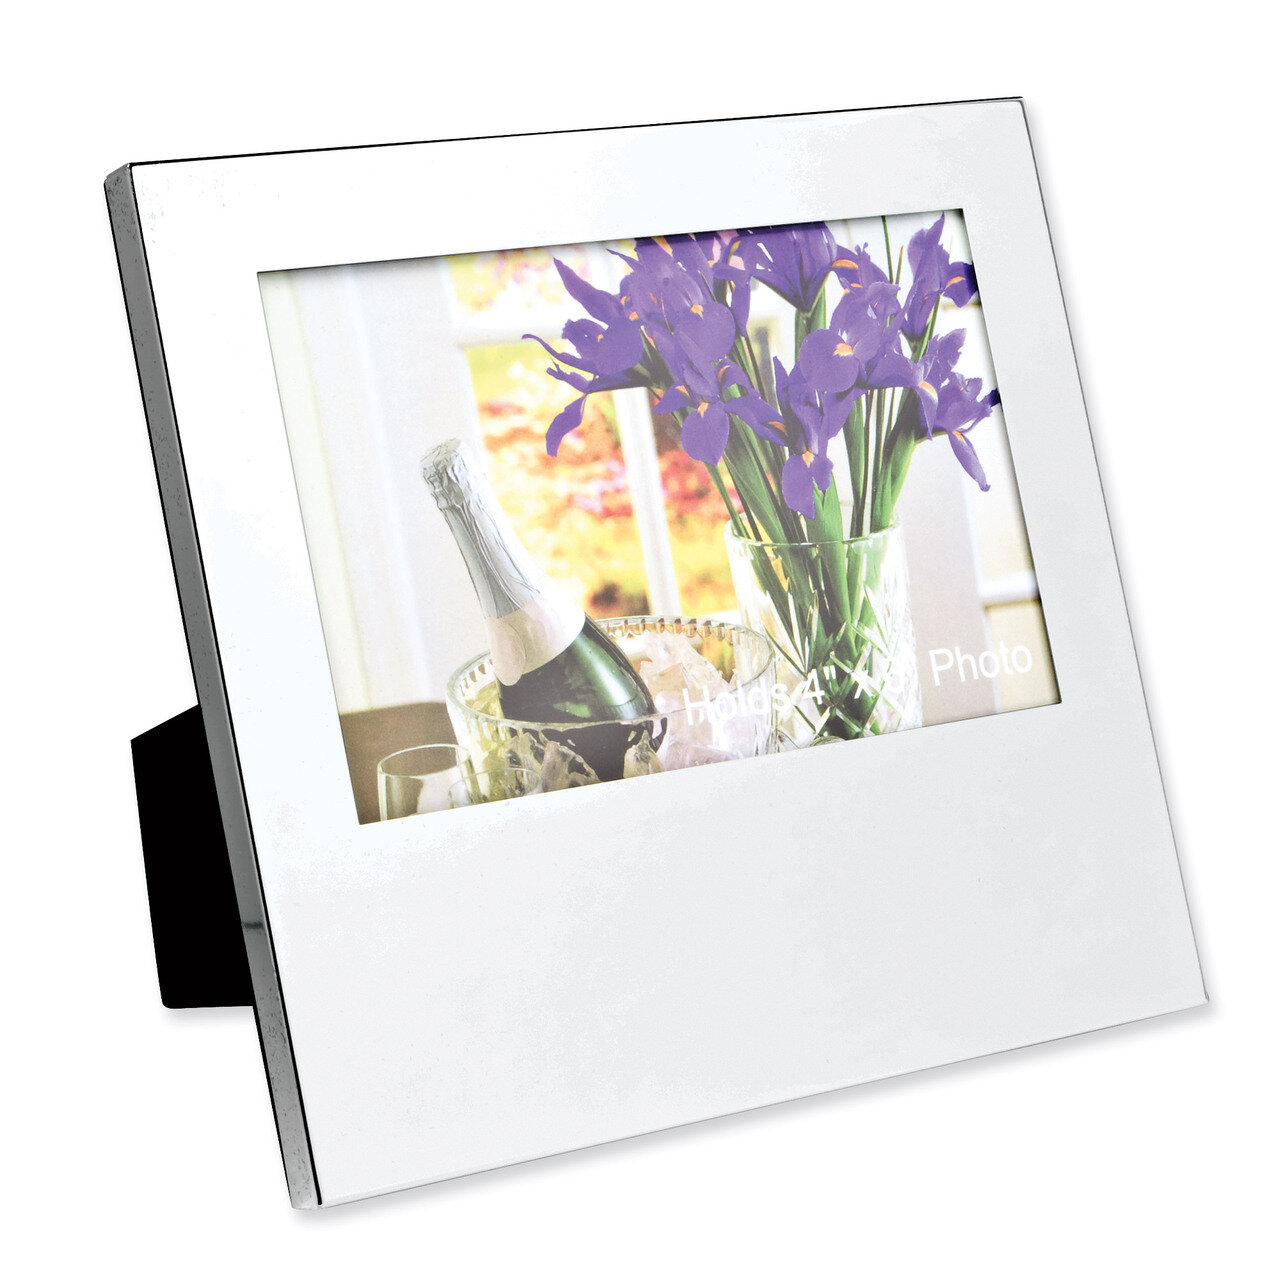 Nickel-plated Oversized 4 x 6 Inch Picture Frame GL9439